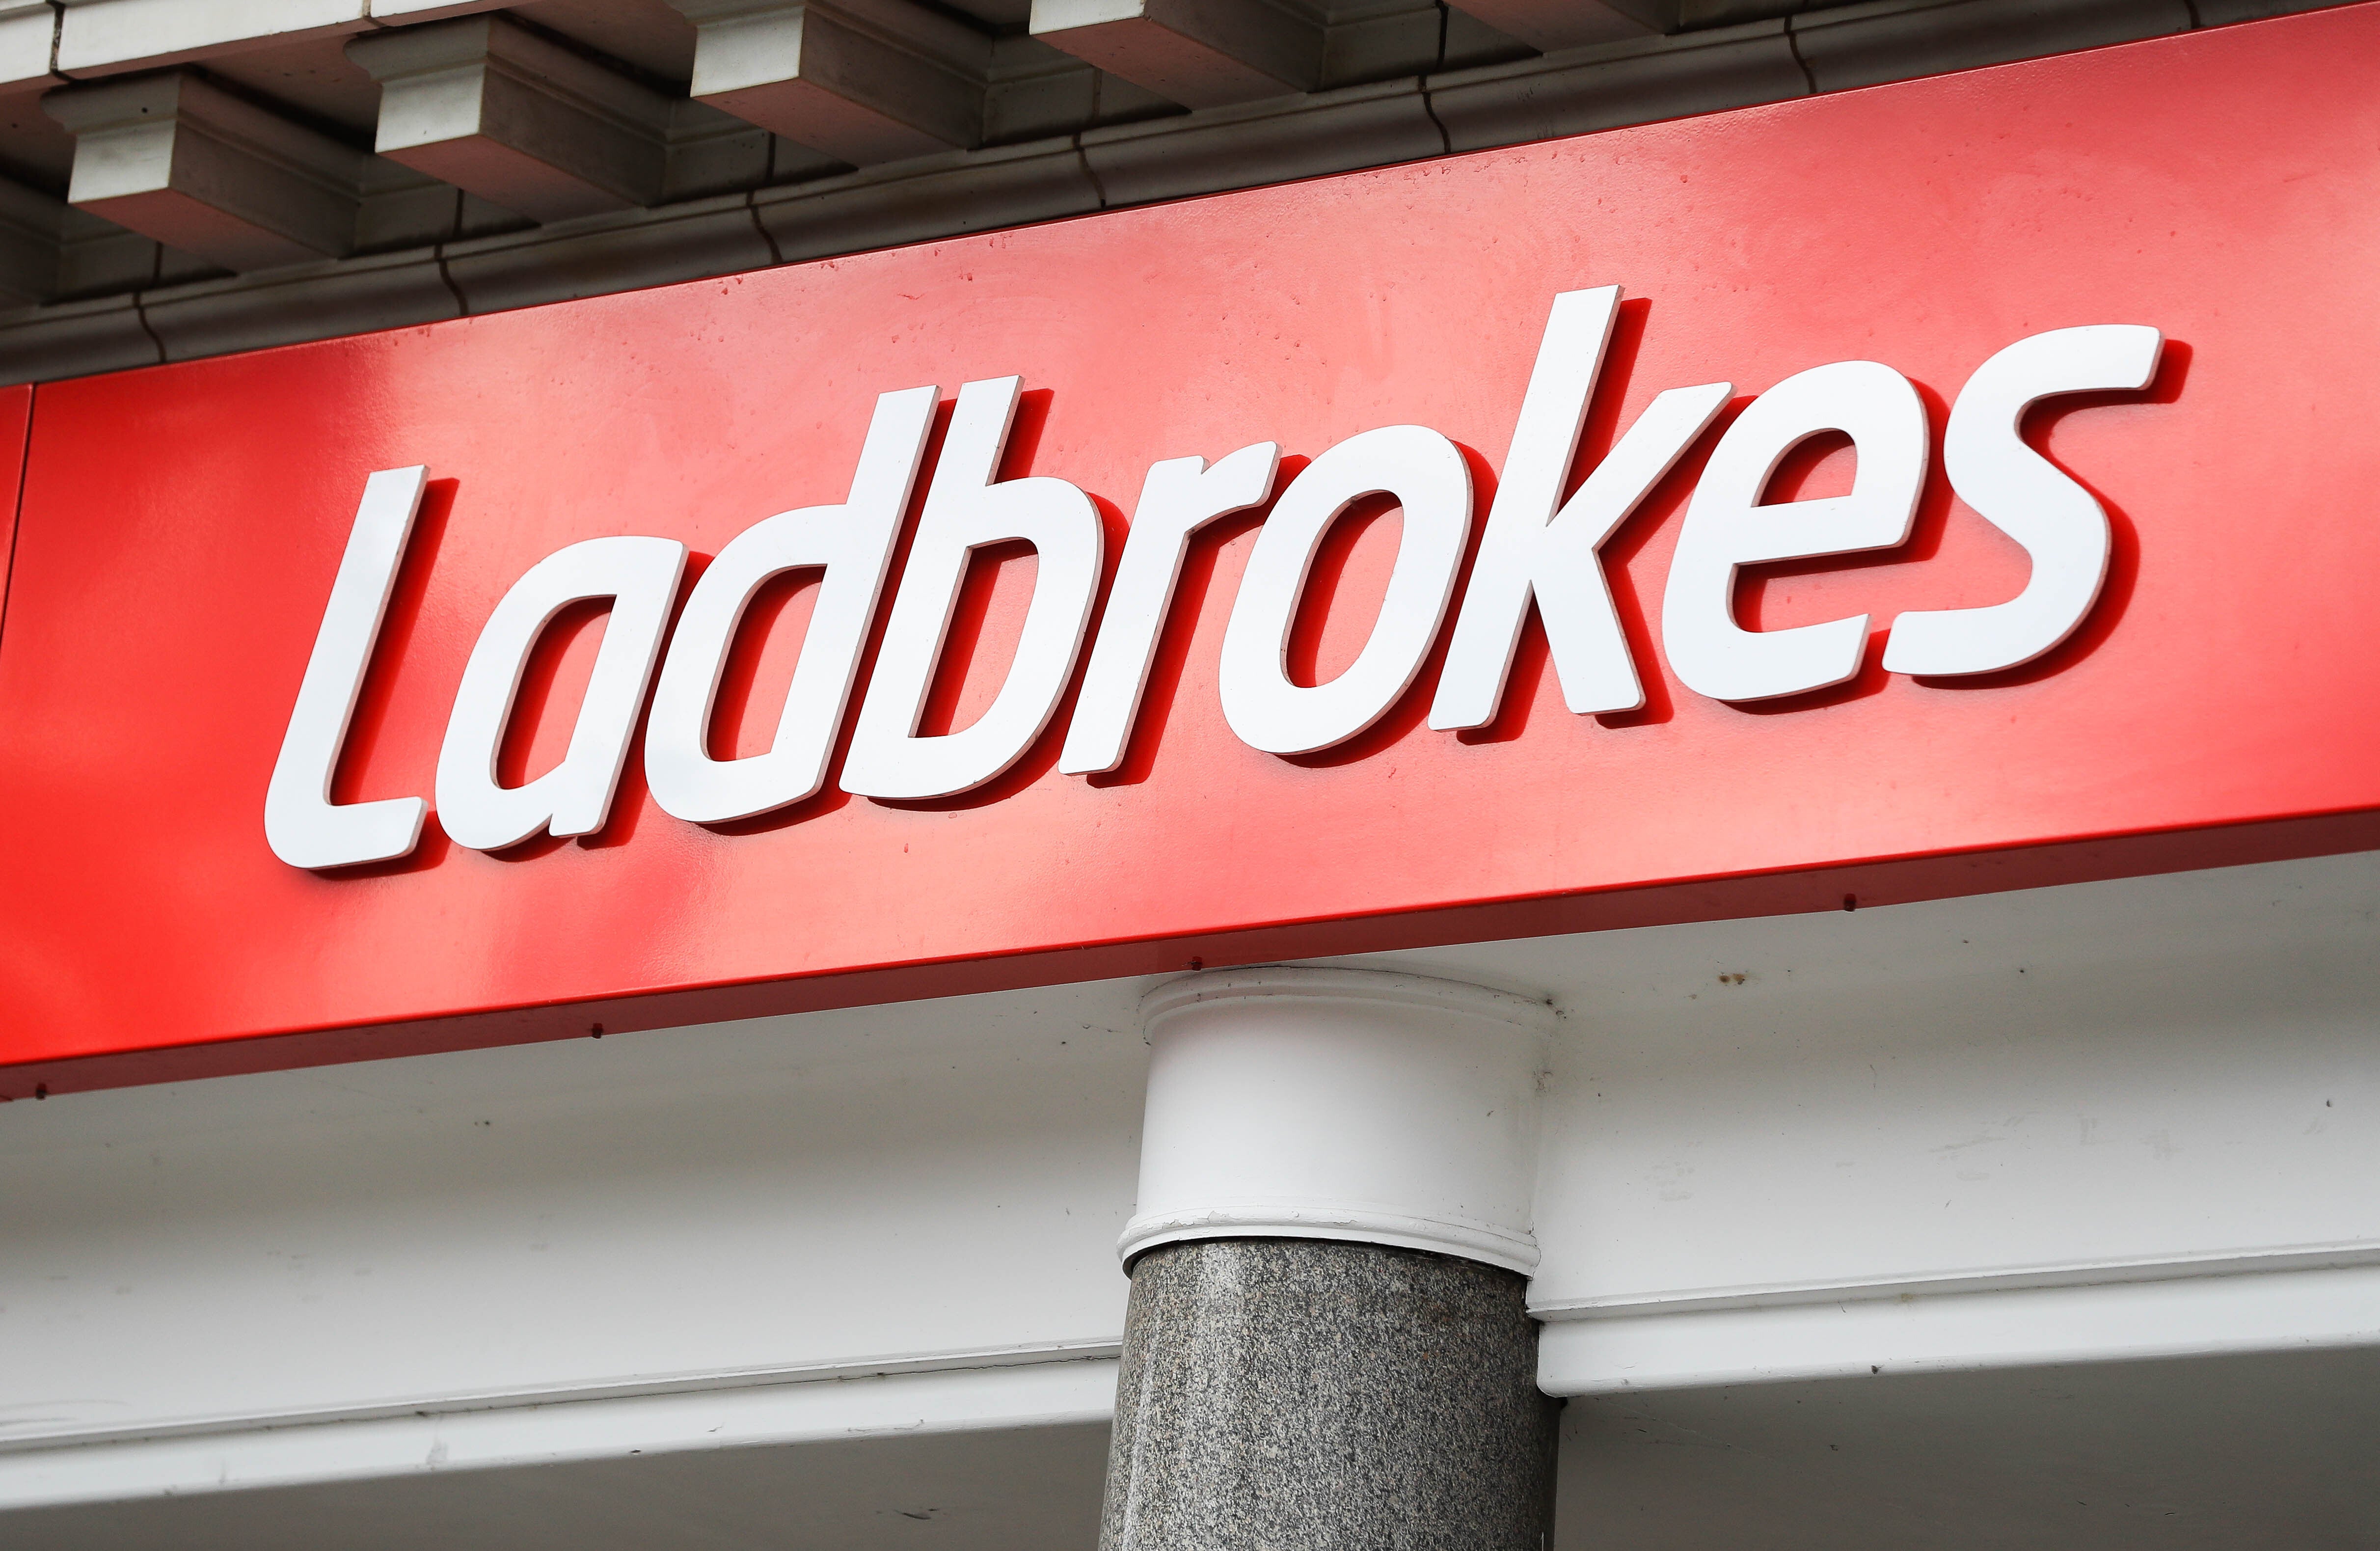 Ladbrokes owner Entain saw profits surge as sporting events returned (Mike Egerton/PA)